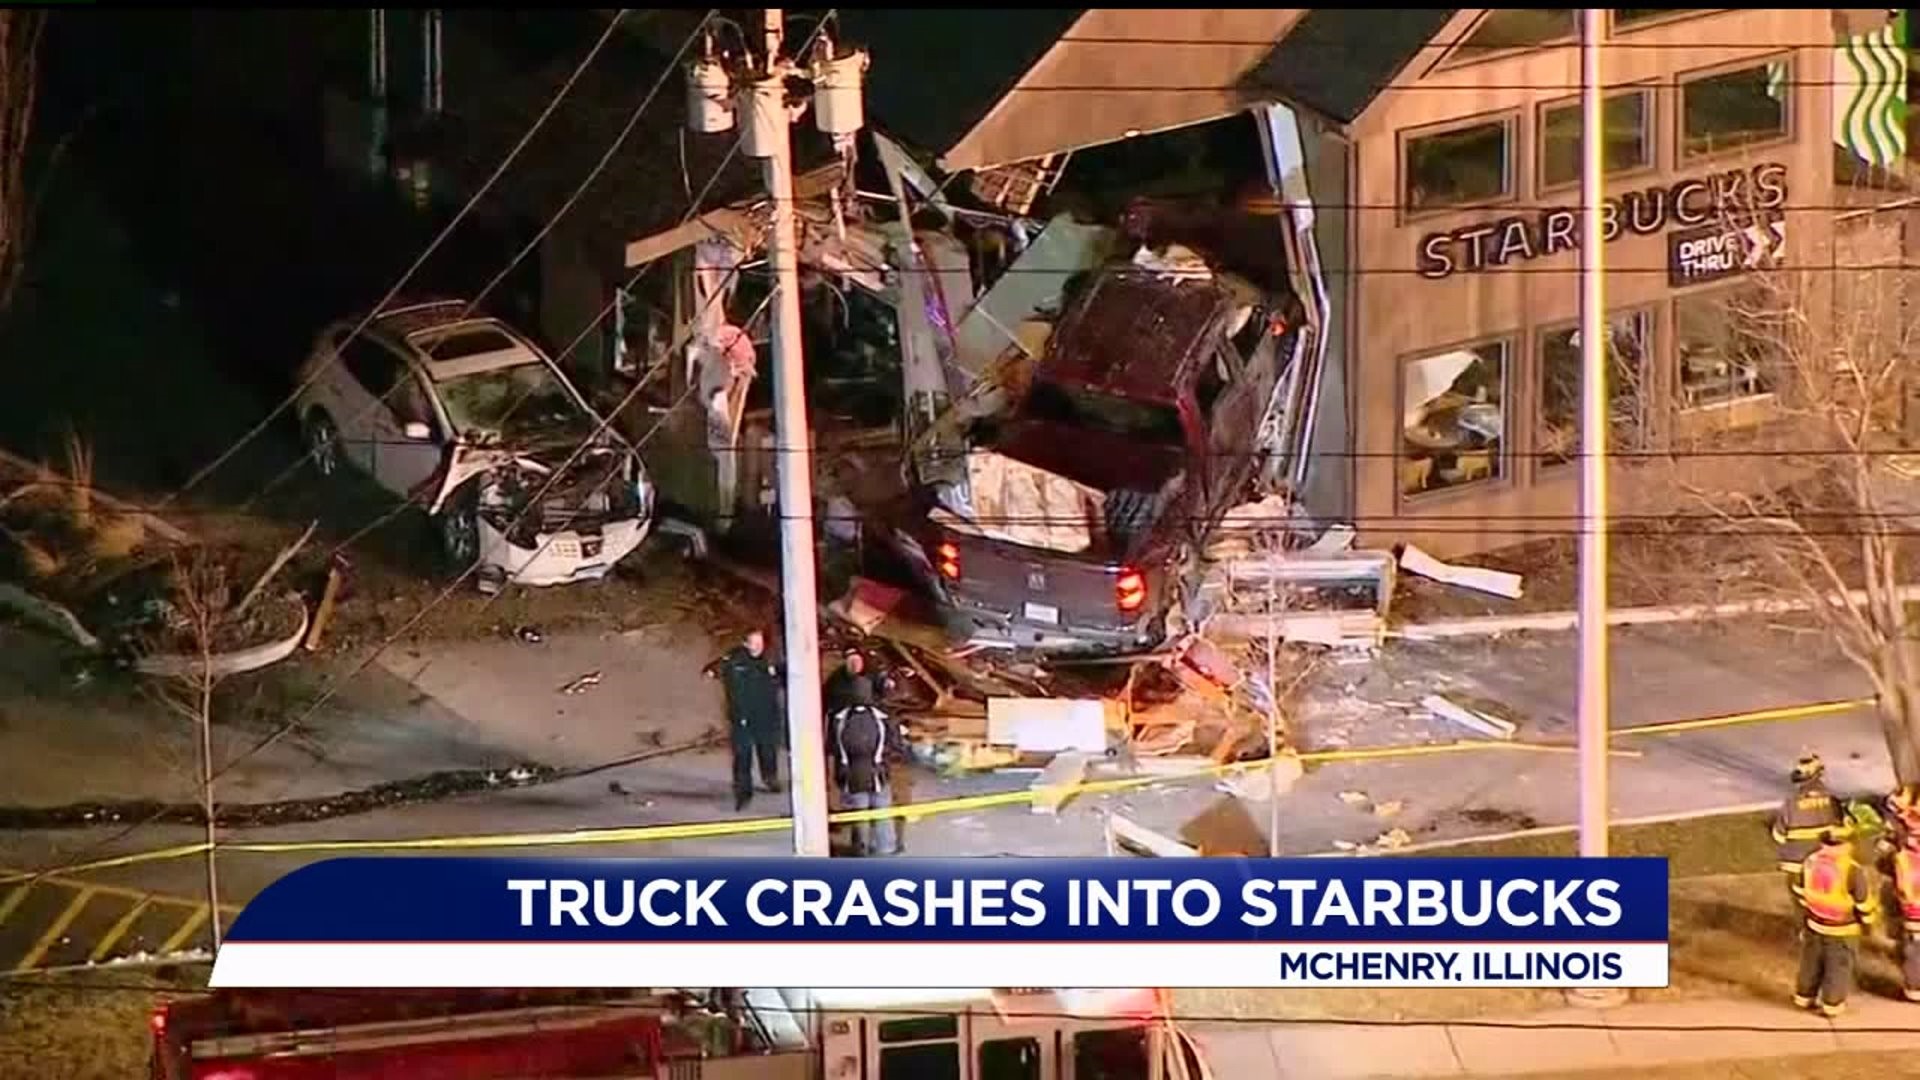 Truck crashes into McHenry County Starbucks, injures five